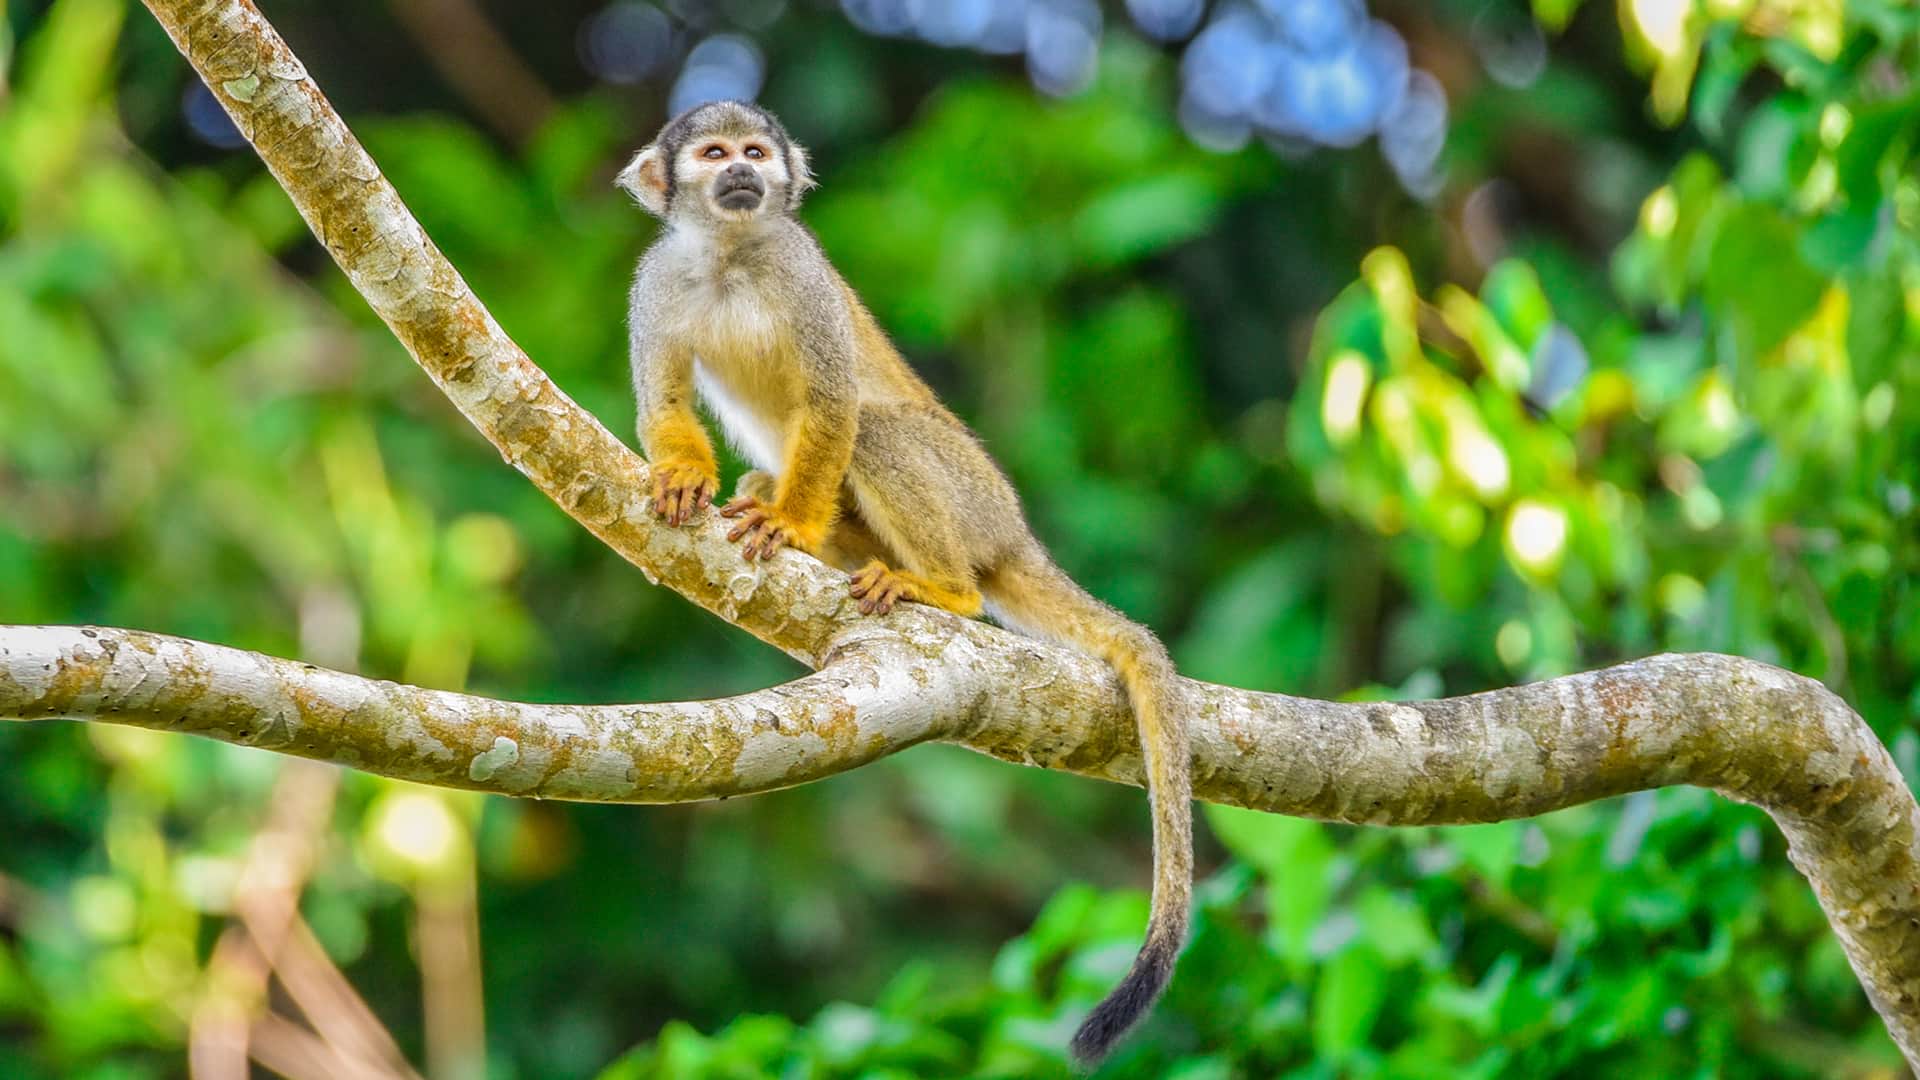 A squirrel monkey standing in a branch | Responsible Travel Peru